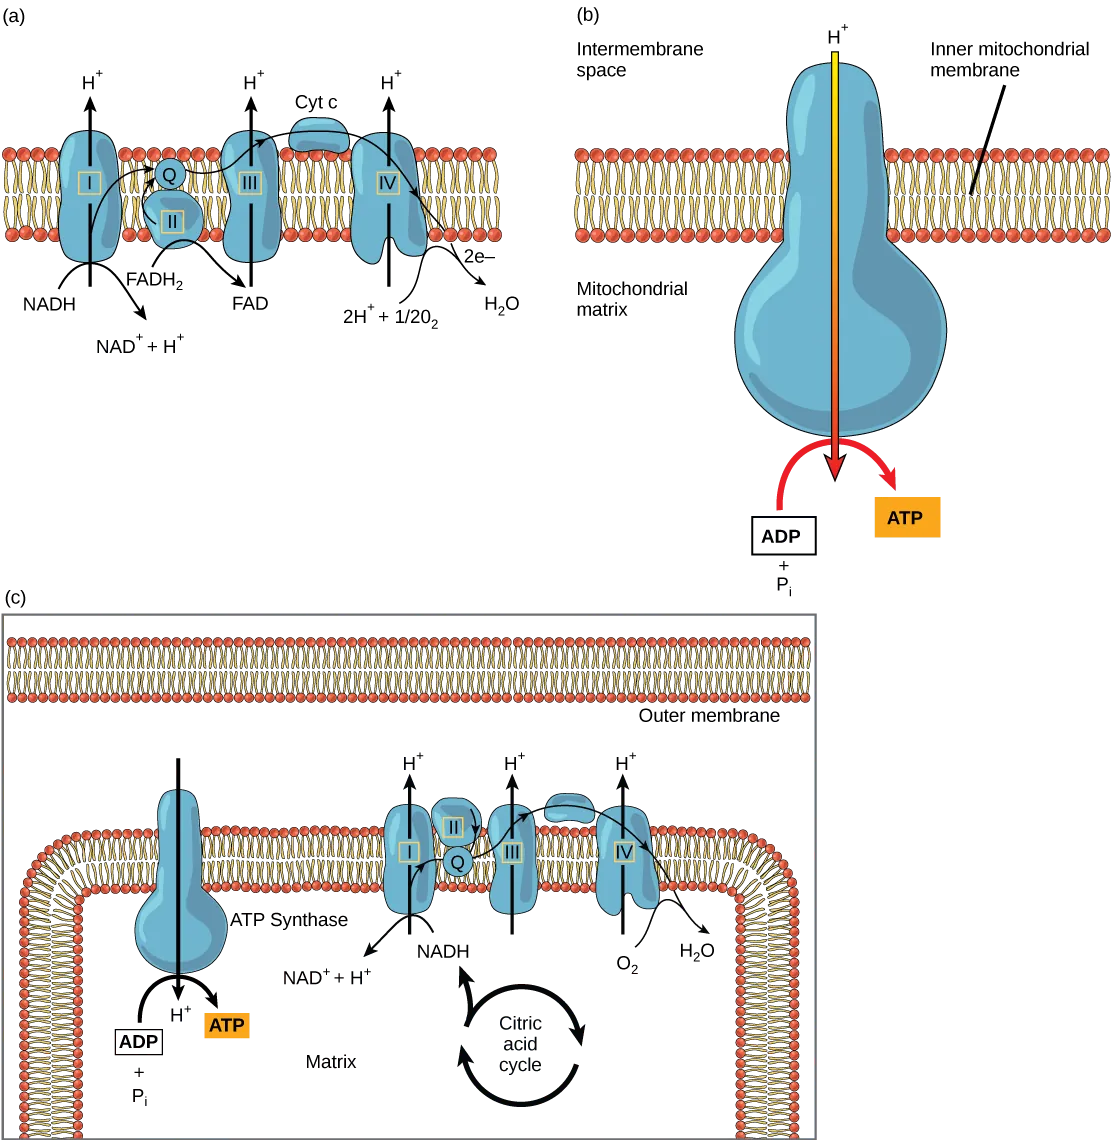 Part a: This illustration shows the electron transport chain embedded in the inner mitochondrial membrane. The electron transport chain consists of four electron complexes. Complex I oxidizes NADH to NAD+ and simultaneously pumps a proton across the membrane into the intermembrane space. The two electrons released from NADH are shuttled to coenzyme Q, then to complex III, to cytochrome c, to complex IV, then to molecular oxygen. In the process, two more protons are pumped across the membrane into the intermembrane space, and molecular oxygen is reduced to form water. Complex II removes two electrons from FADH2, thereby forming FAD. The electrons are shuttled to coenzyme Q, then to complex III, cytochrome c, complex I, and molecular oxygen as in the case of NADH oxidation. Part b: This illustration shows an ATP synthase enzyme embedded in the inner mitochondrial membrane. ATP synthase allows protons to move from an area of high concentration in the intermembrane space to an area of low concentration in the mitochondrial matrix. The energy derived from this exergonic process is used to synthesize ATP from ADP and inorganic phosphate. Part c: This illustration shows the electron transport chain and ATP synthase enzyme embedded in the inner mitochondrial membrane, and the citric acid cycle in the mitochondrial matrix. The citric acid cycle feeds NADH and FADH2 into the electron transport chain. The electron transport chain oxidizes these substrates and, in the process, pumps protons into the intermembrane space. ATP synthase allows protons to leak back into the matrix and synthesizes ATP. 